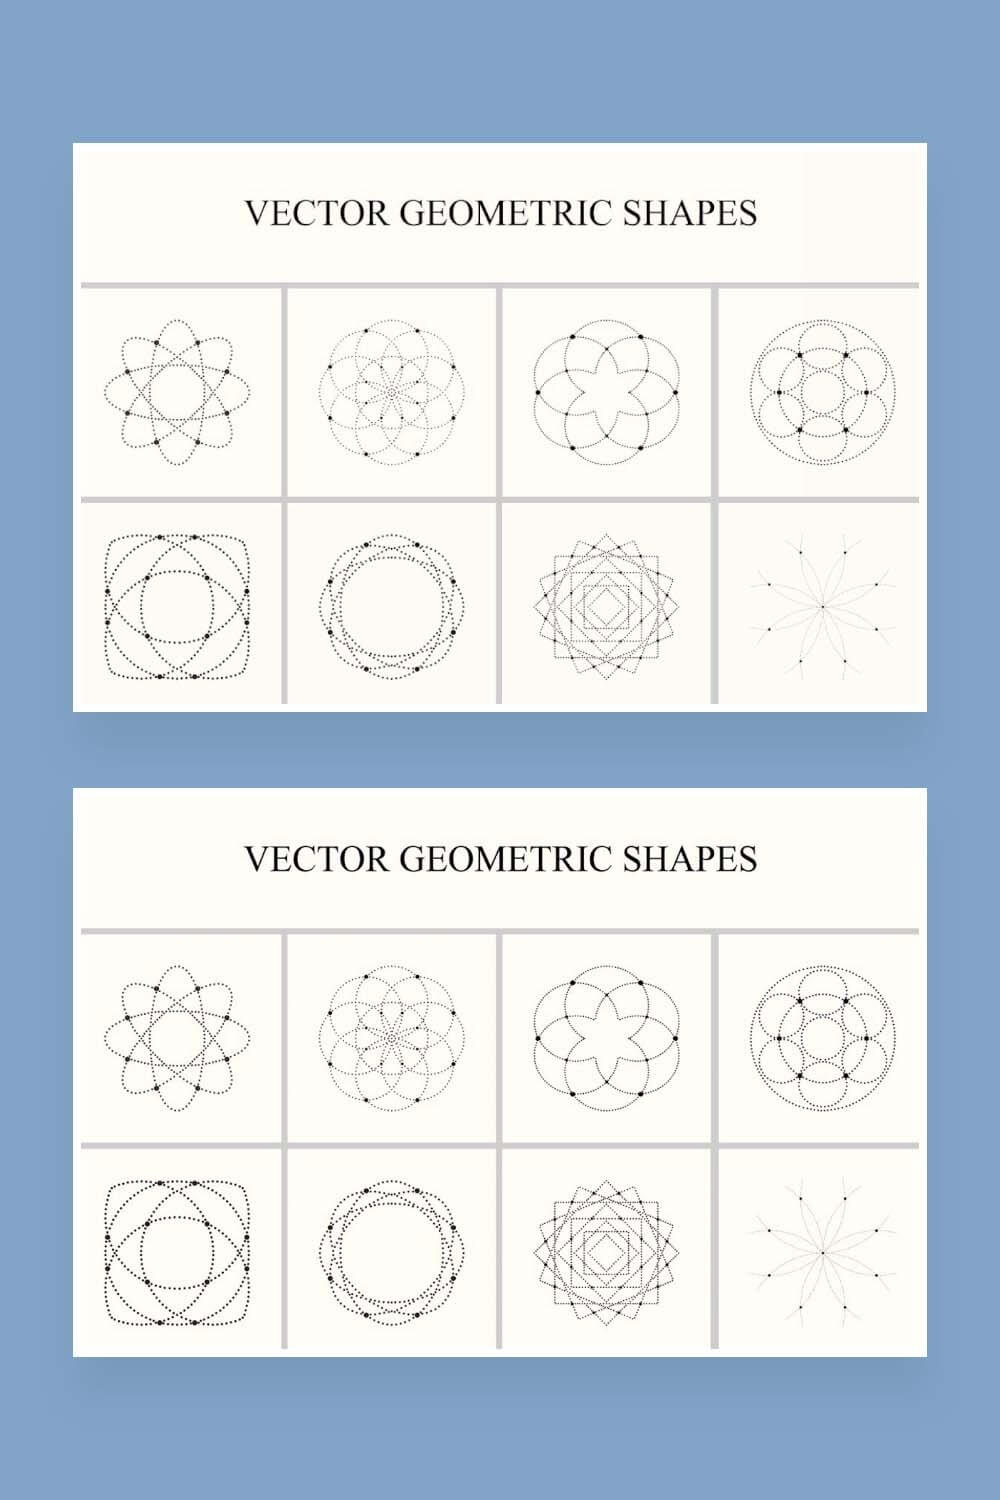 Two images of types of geometric shapes from dots in one picture.